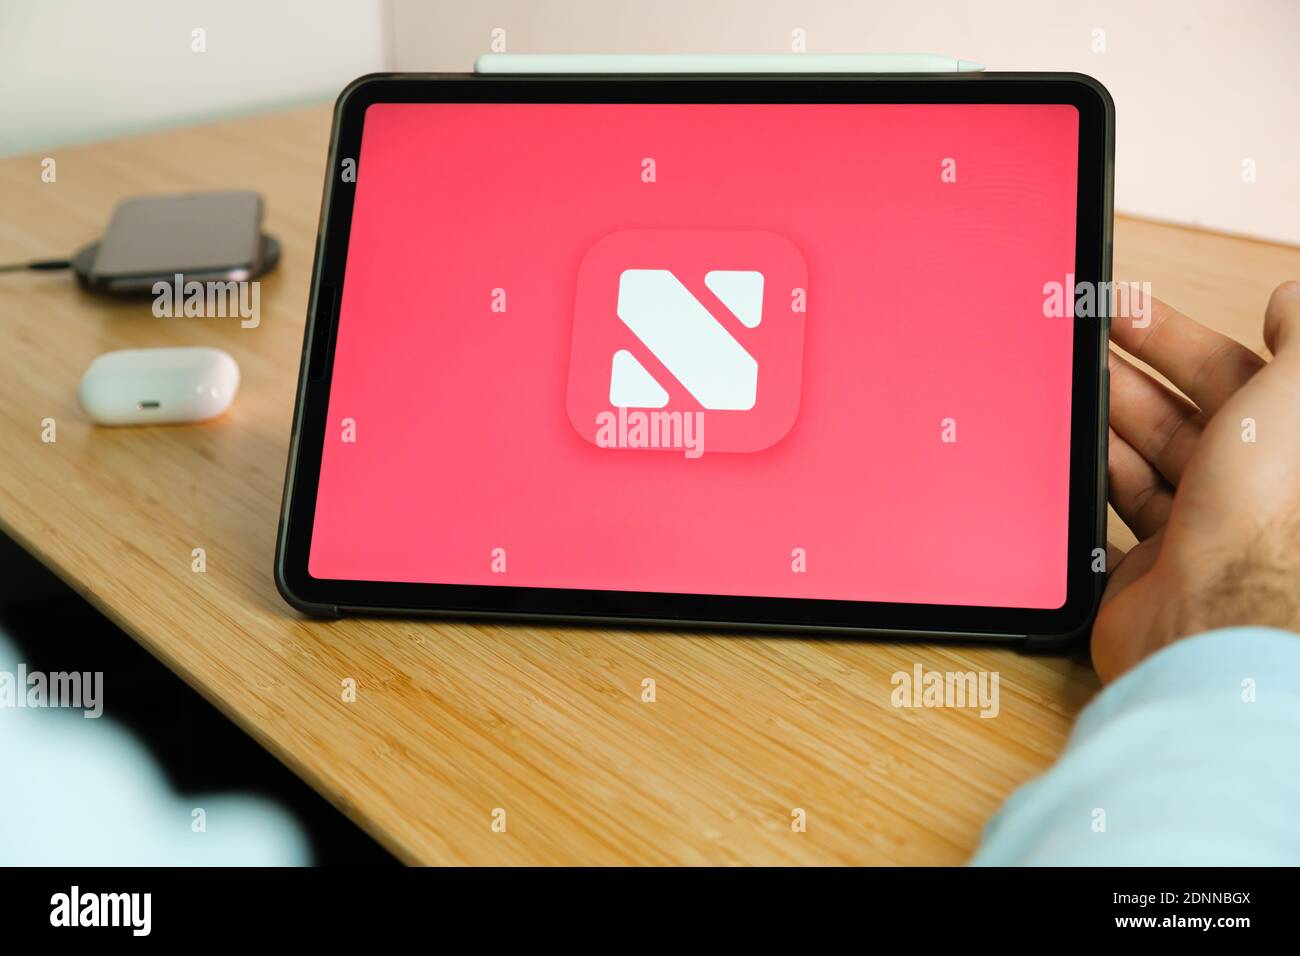 Apple News plus logo on the screen of iPad tablet with smart phone iPhone  charging on the wireless charger and airpods in the case on the background  Stock Photo - Alamy